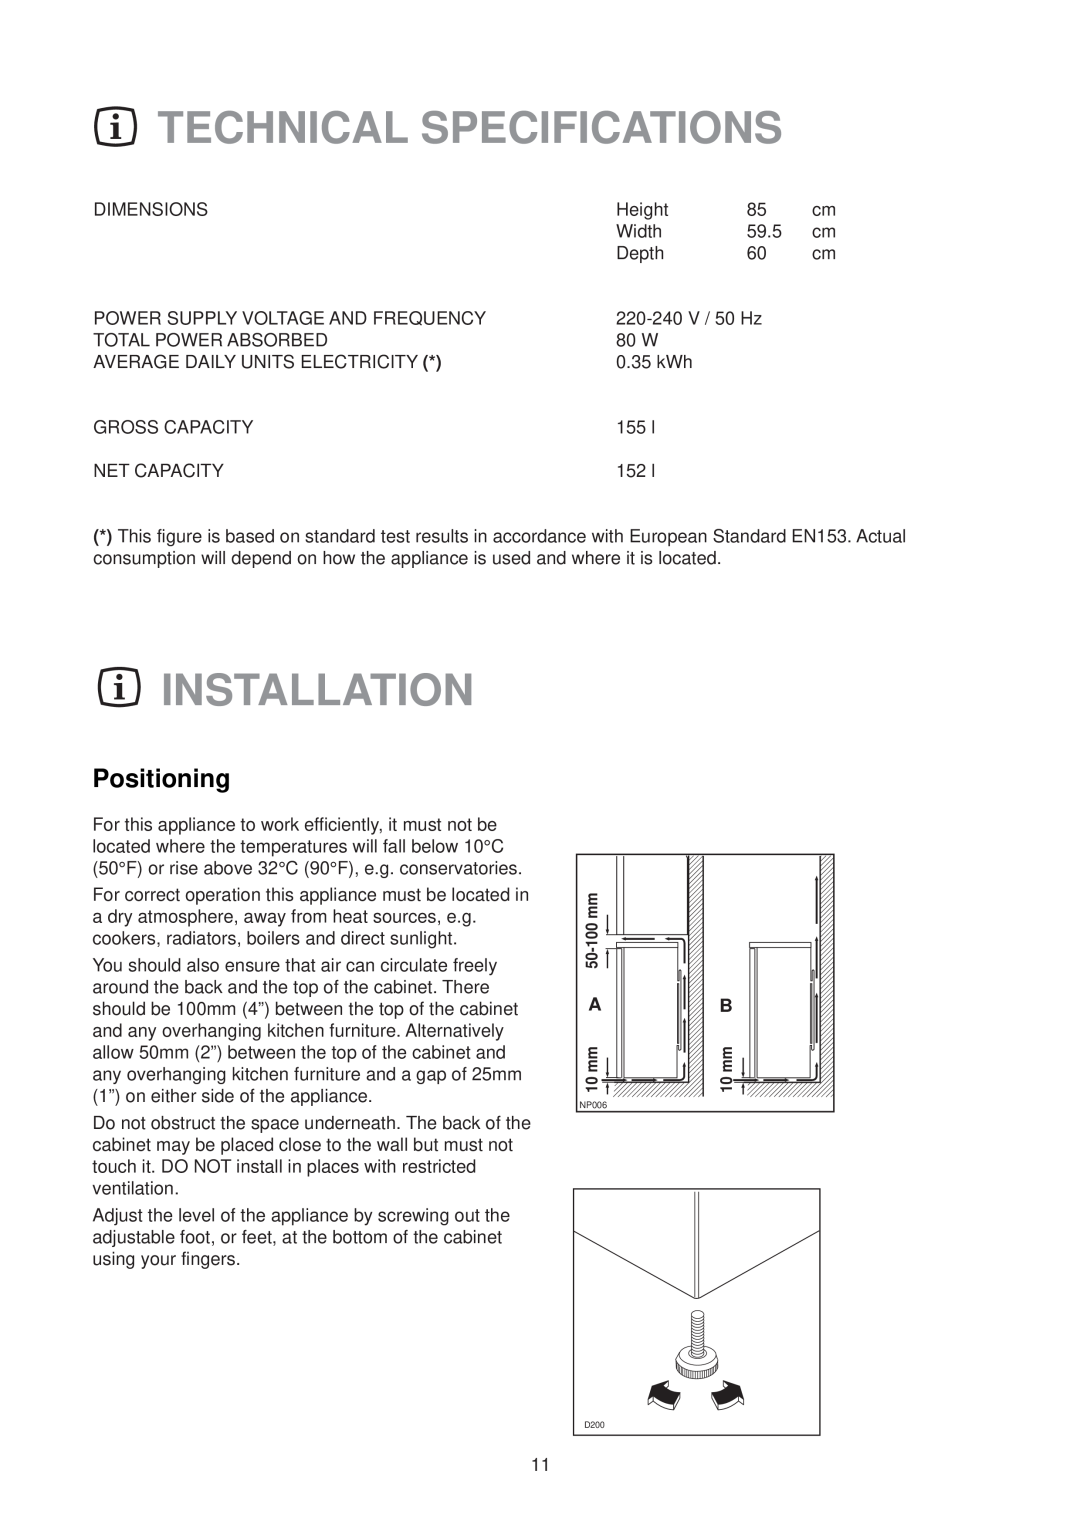 Zanussi ZL 95 W manual Technical Specifications, Installation, Positioning 